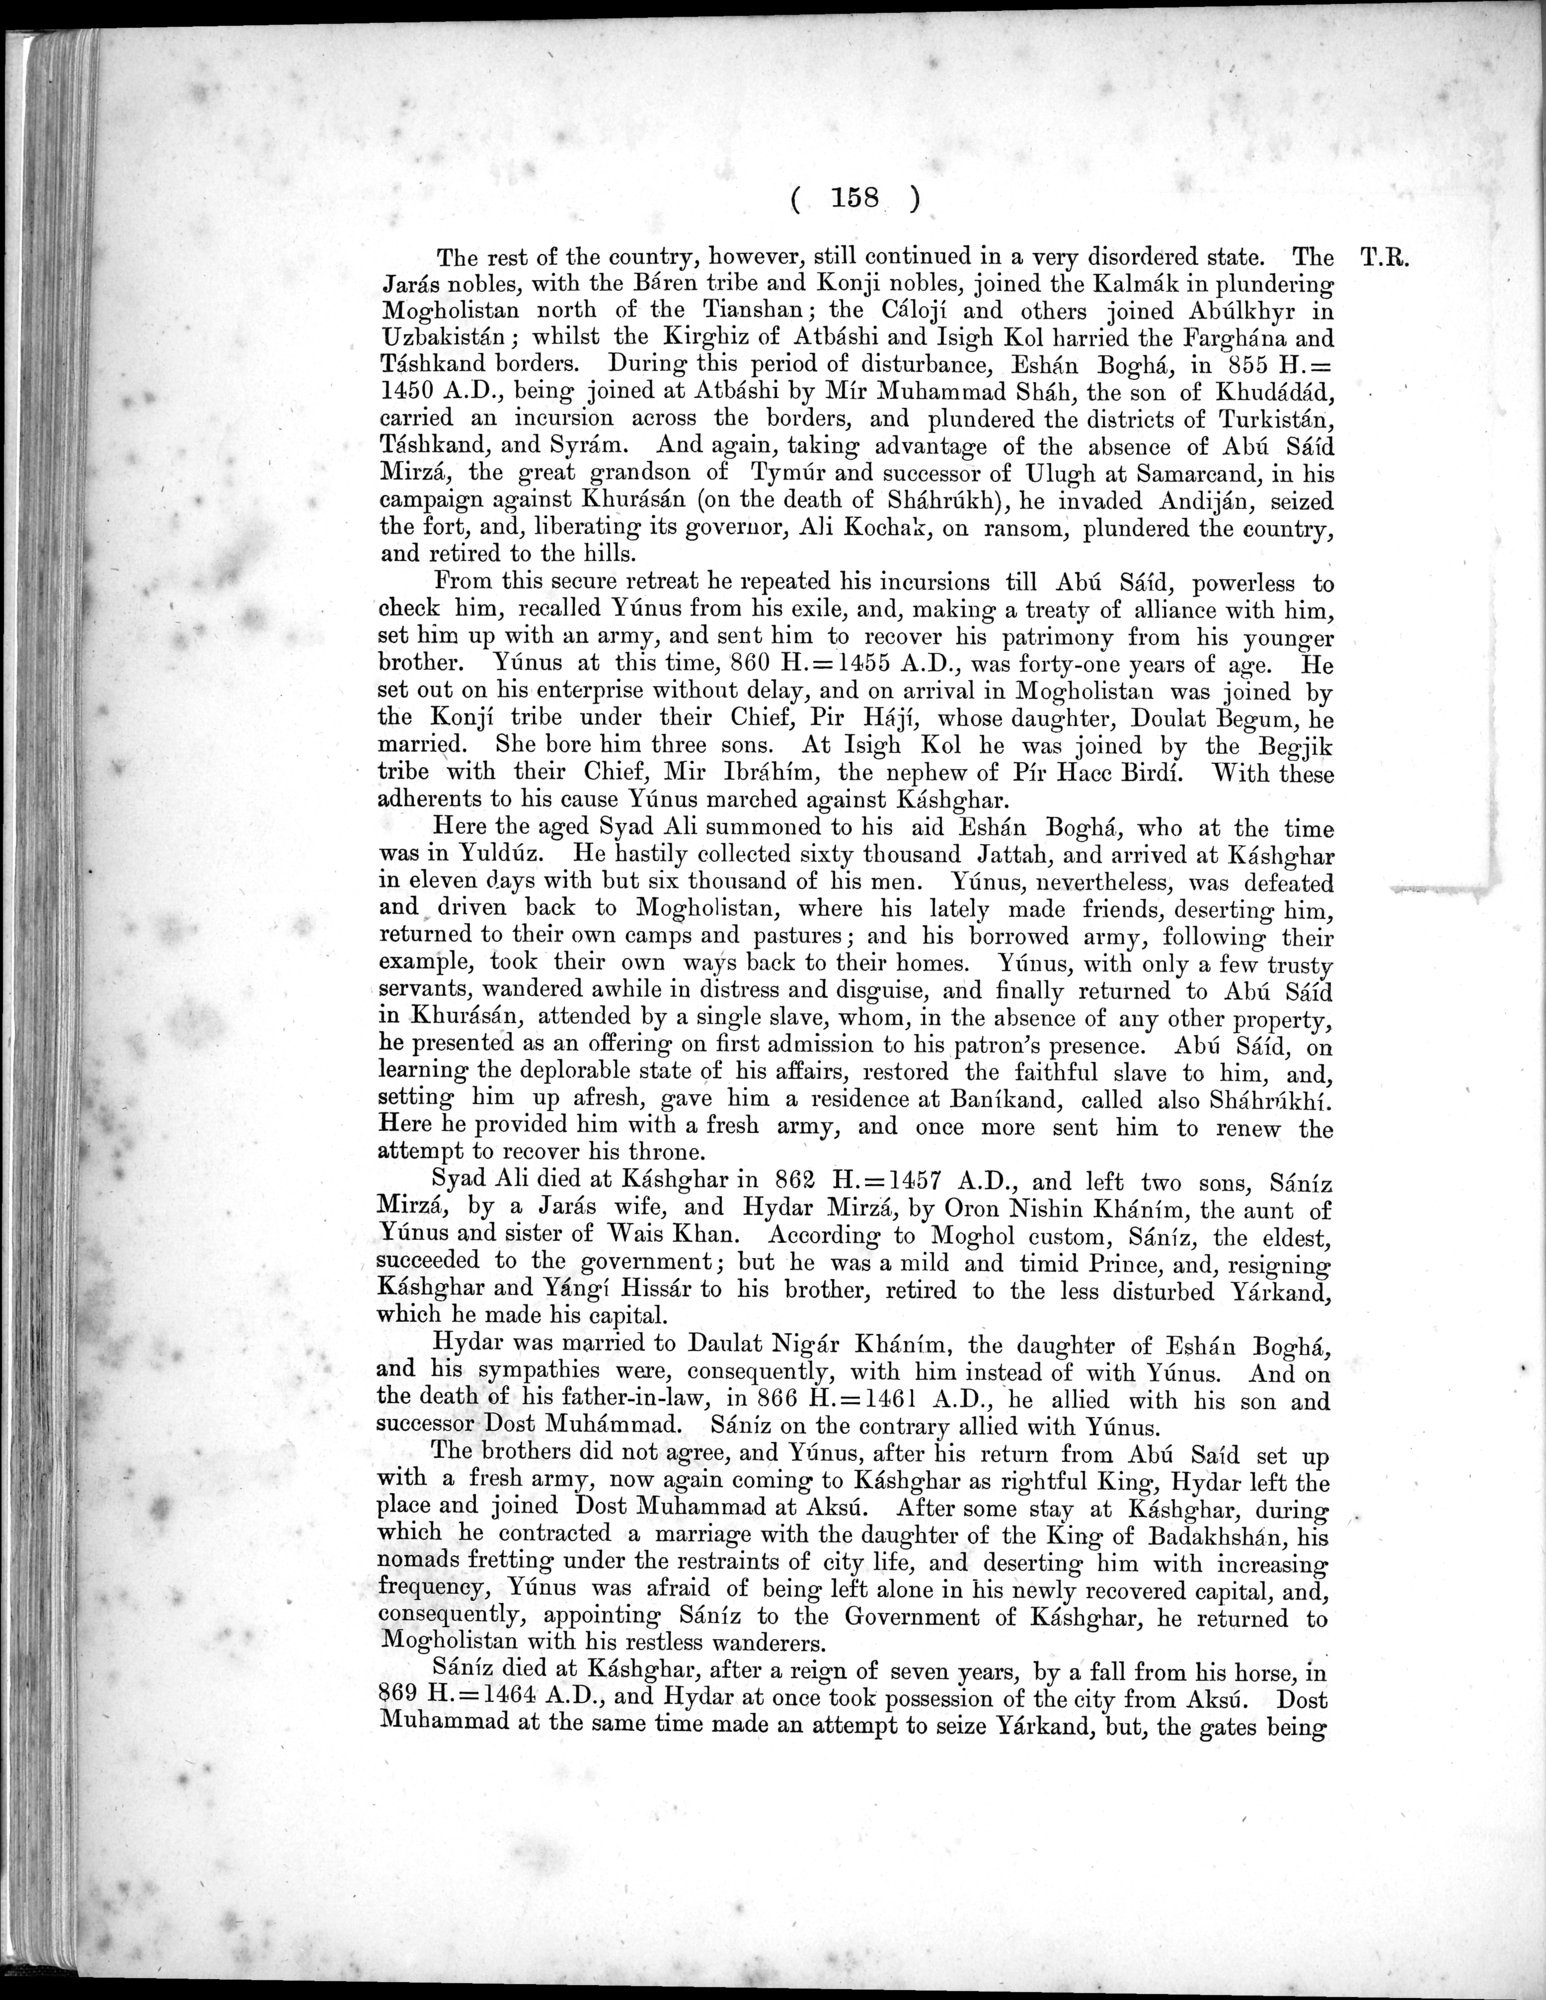 Report of a Mission to Yarkund in 1873 : vol.1 / Page 232 (Grayscale High Resolution Image)